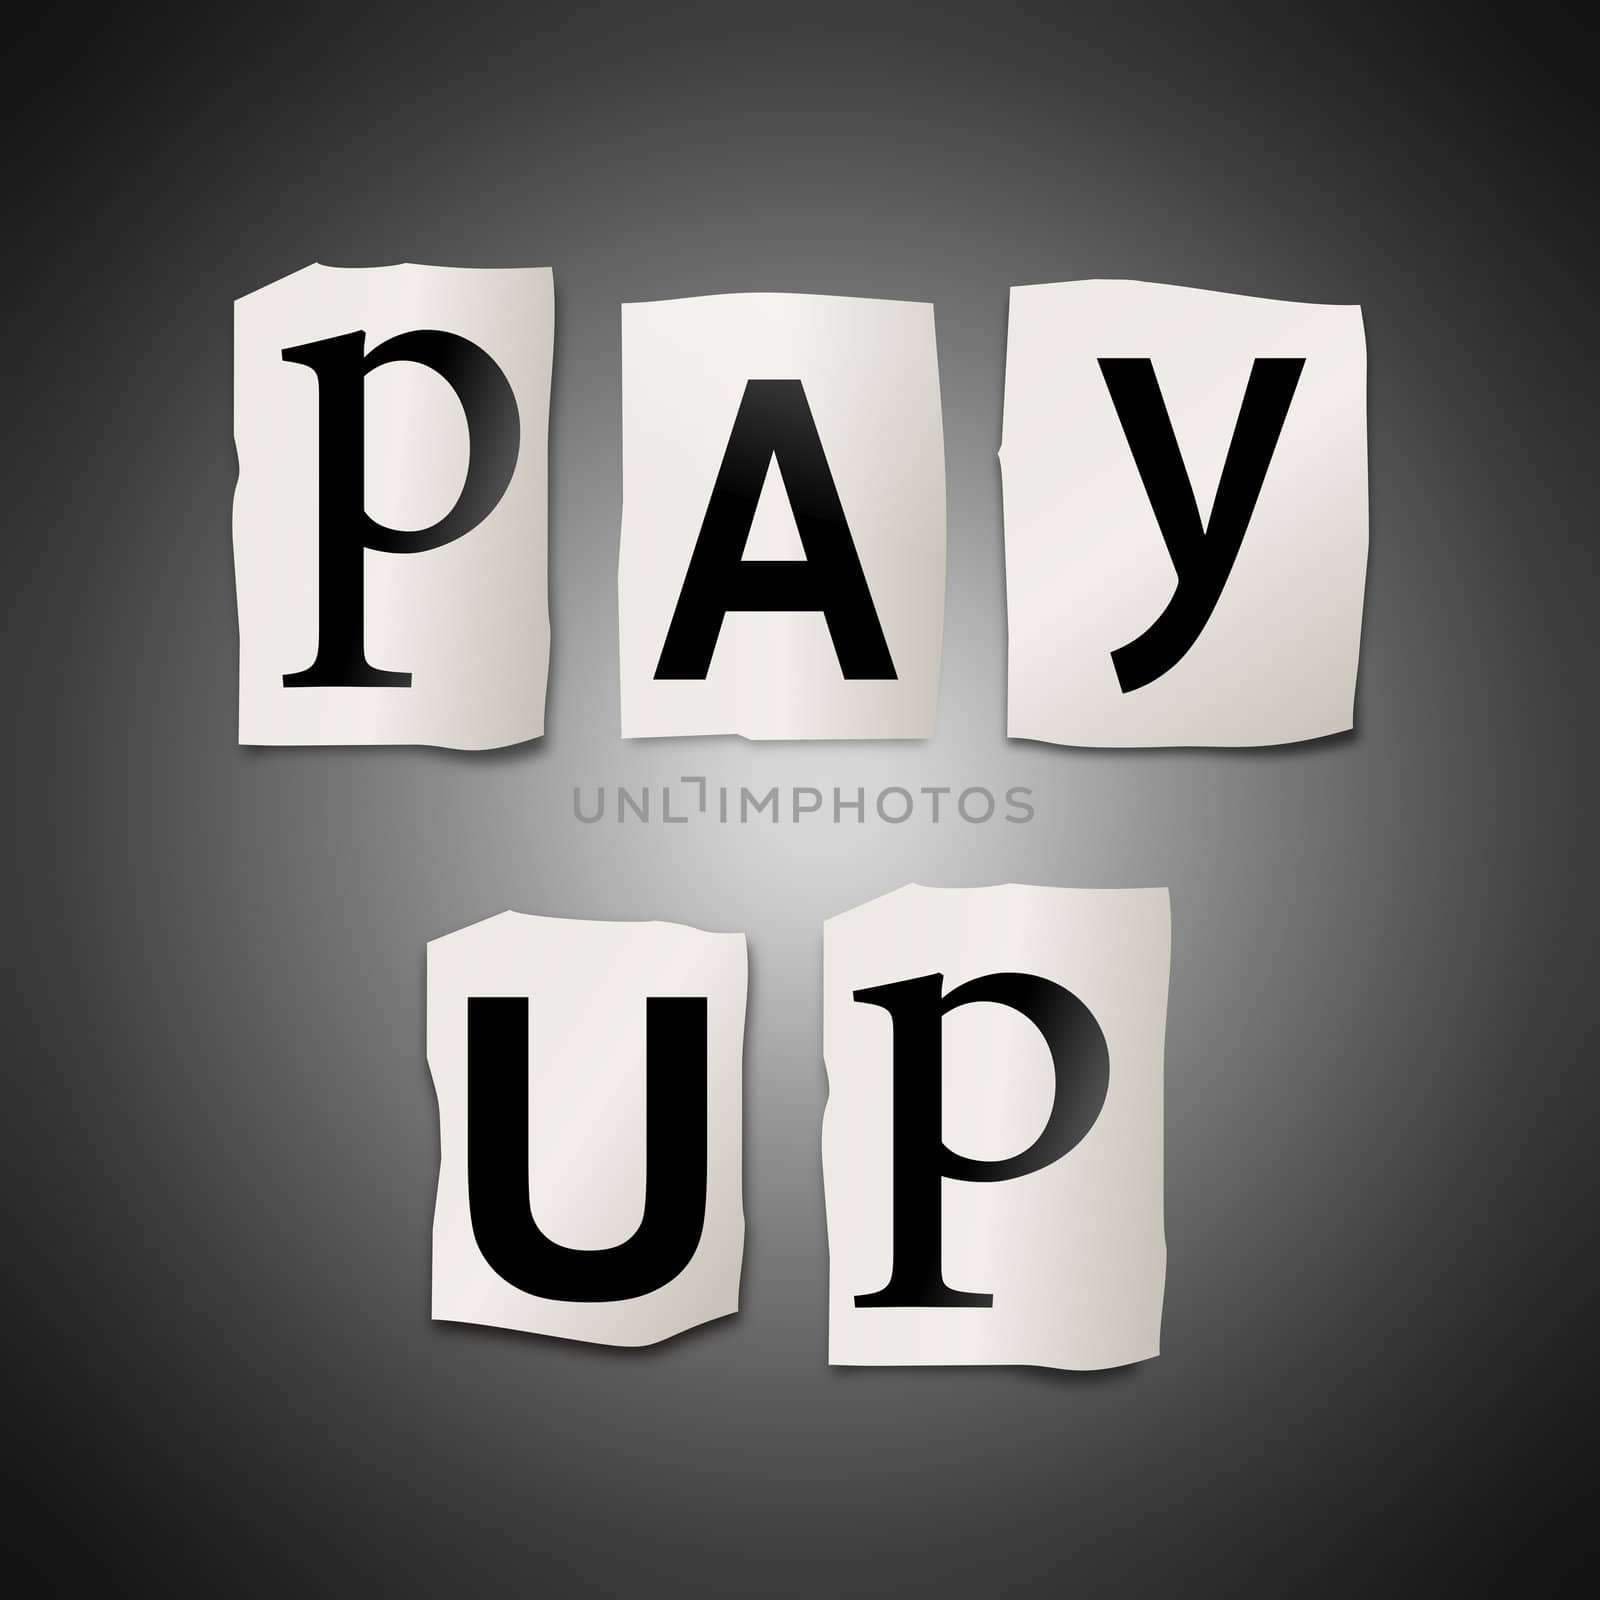 Pay up. by 72soul